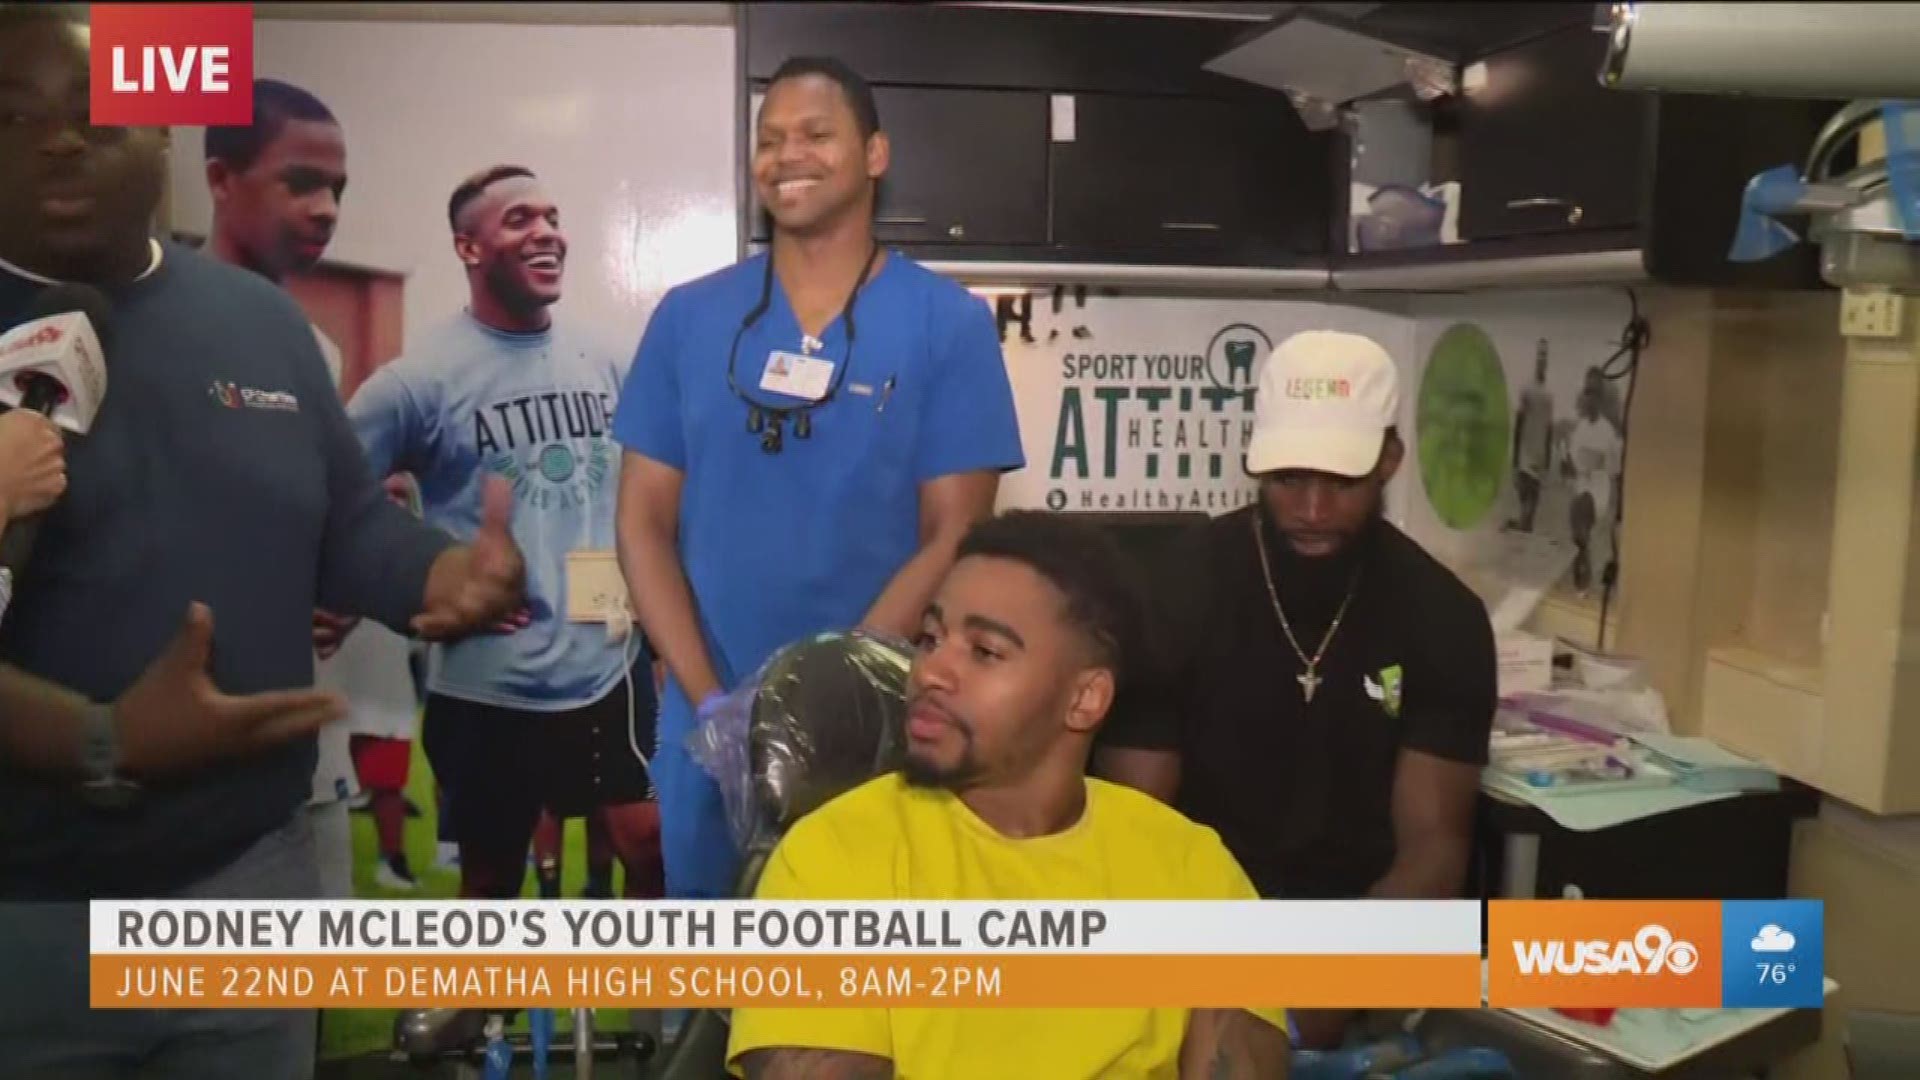 John Suggs, executive director of CF Charities talks about the importance of Rodney McLeod's youth football camp. Kids and teens can still sign up for the camp on June 22 from 8 a.m.-2 p.m. at DeMatha high school. To enroll, go to http://www.rodneymcleod23.com/summer-camp/.